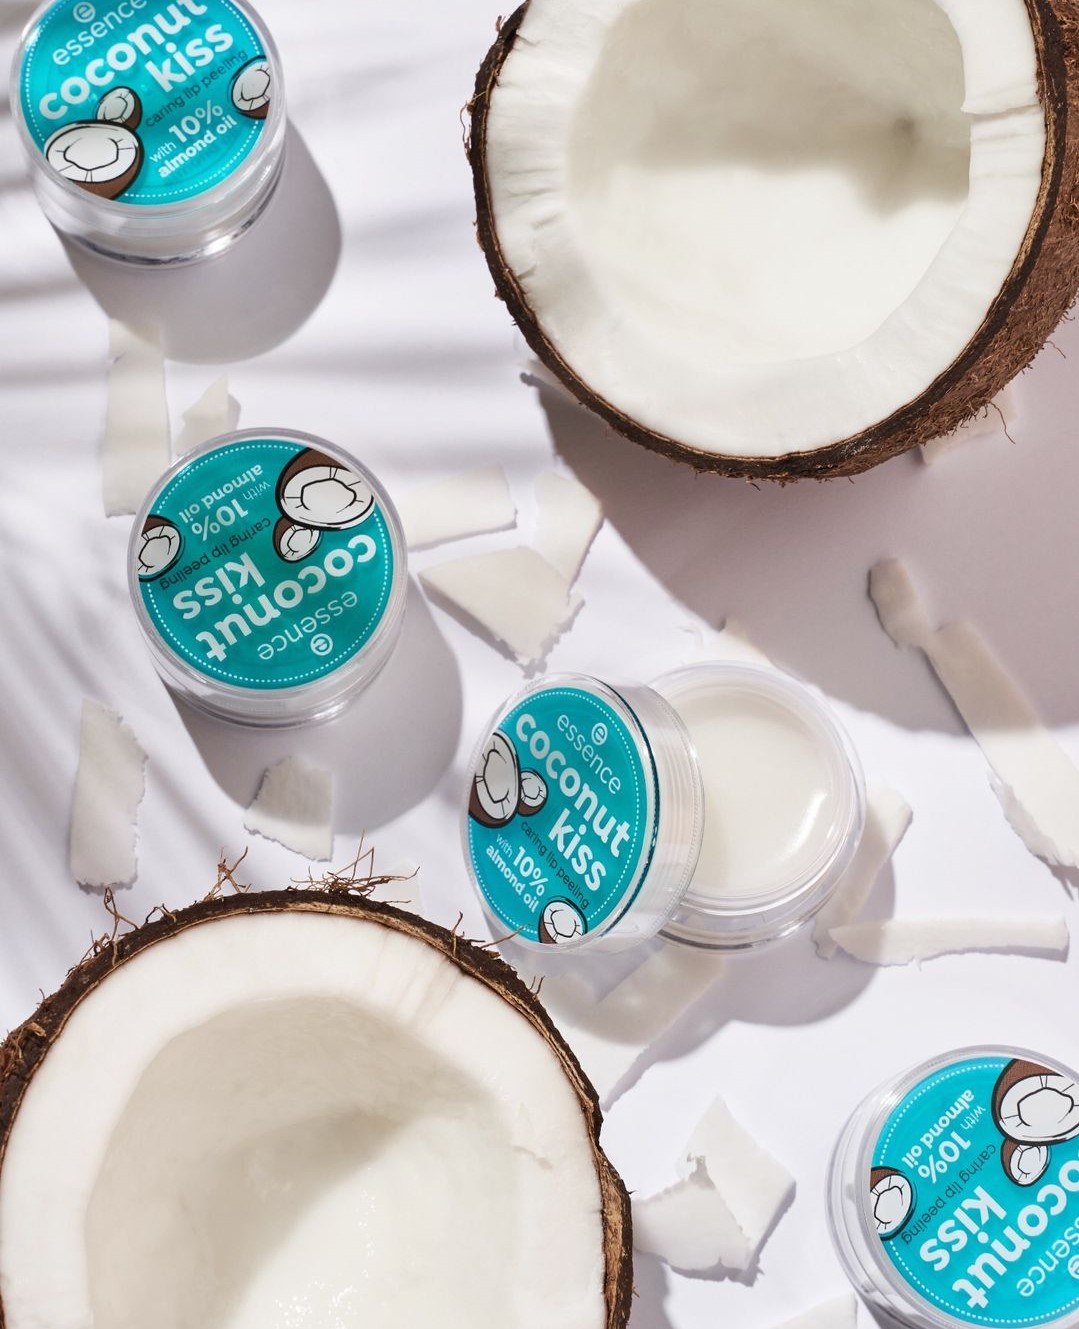 Coconut beauty products